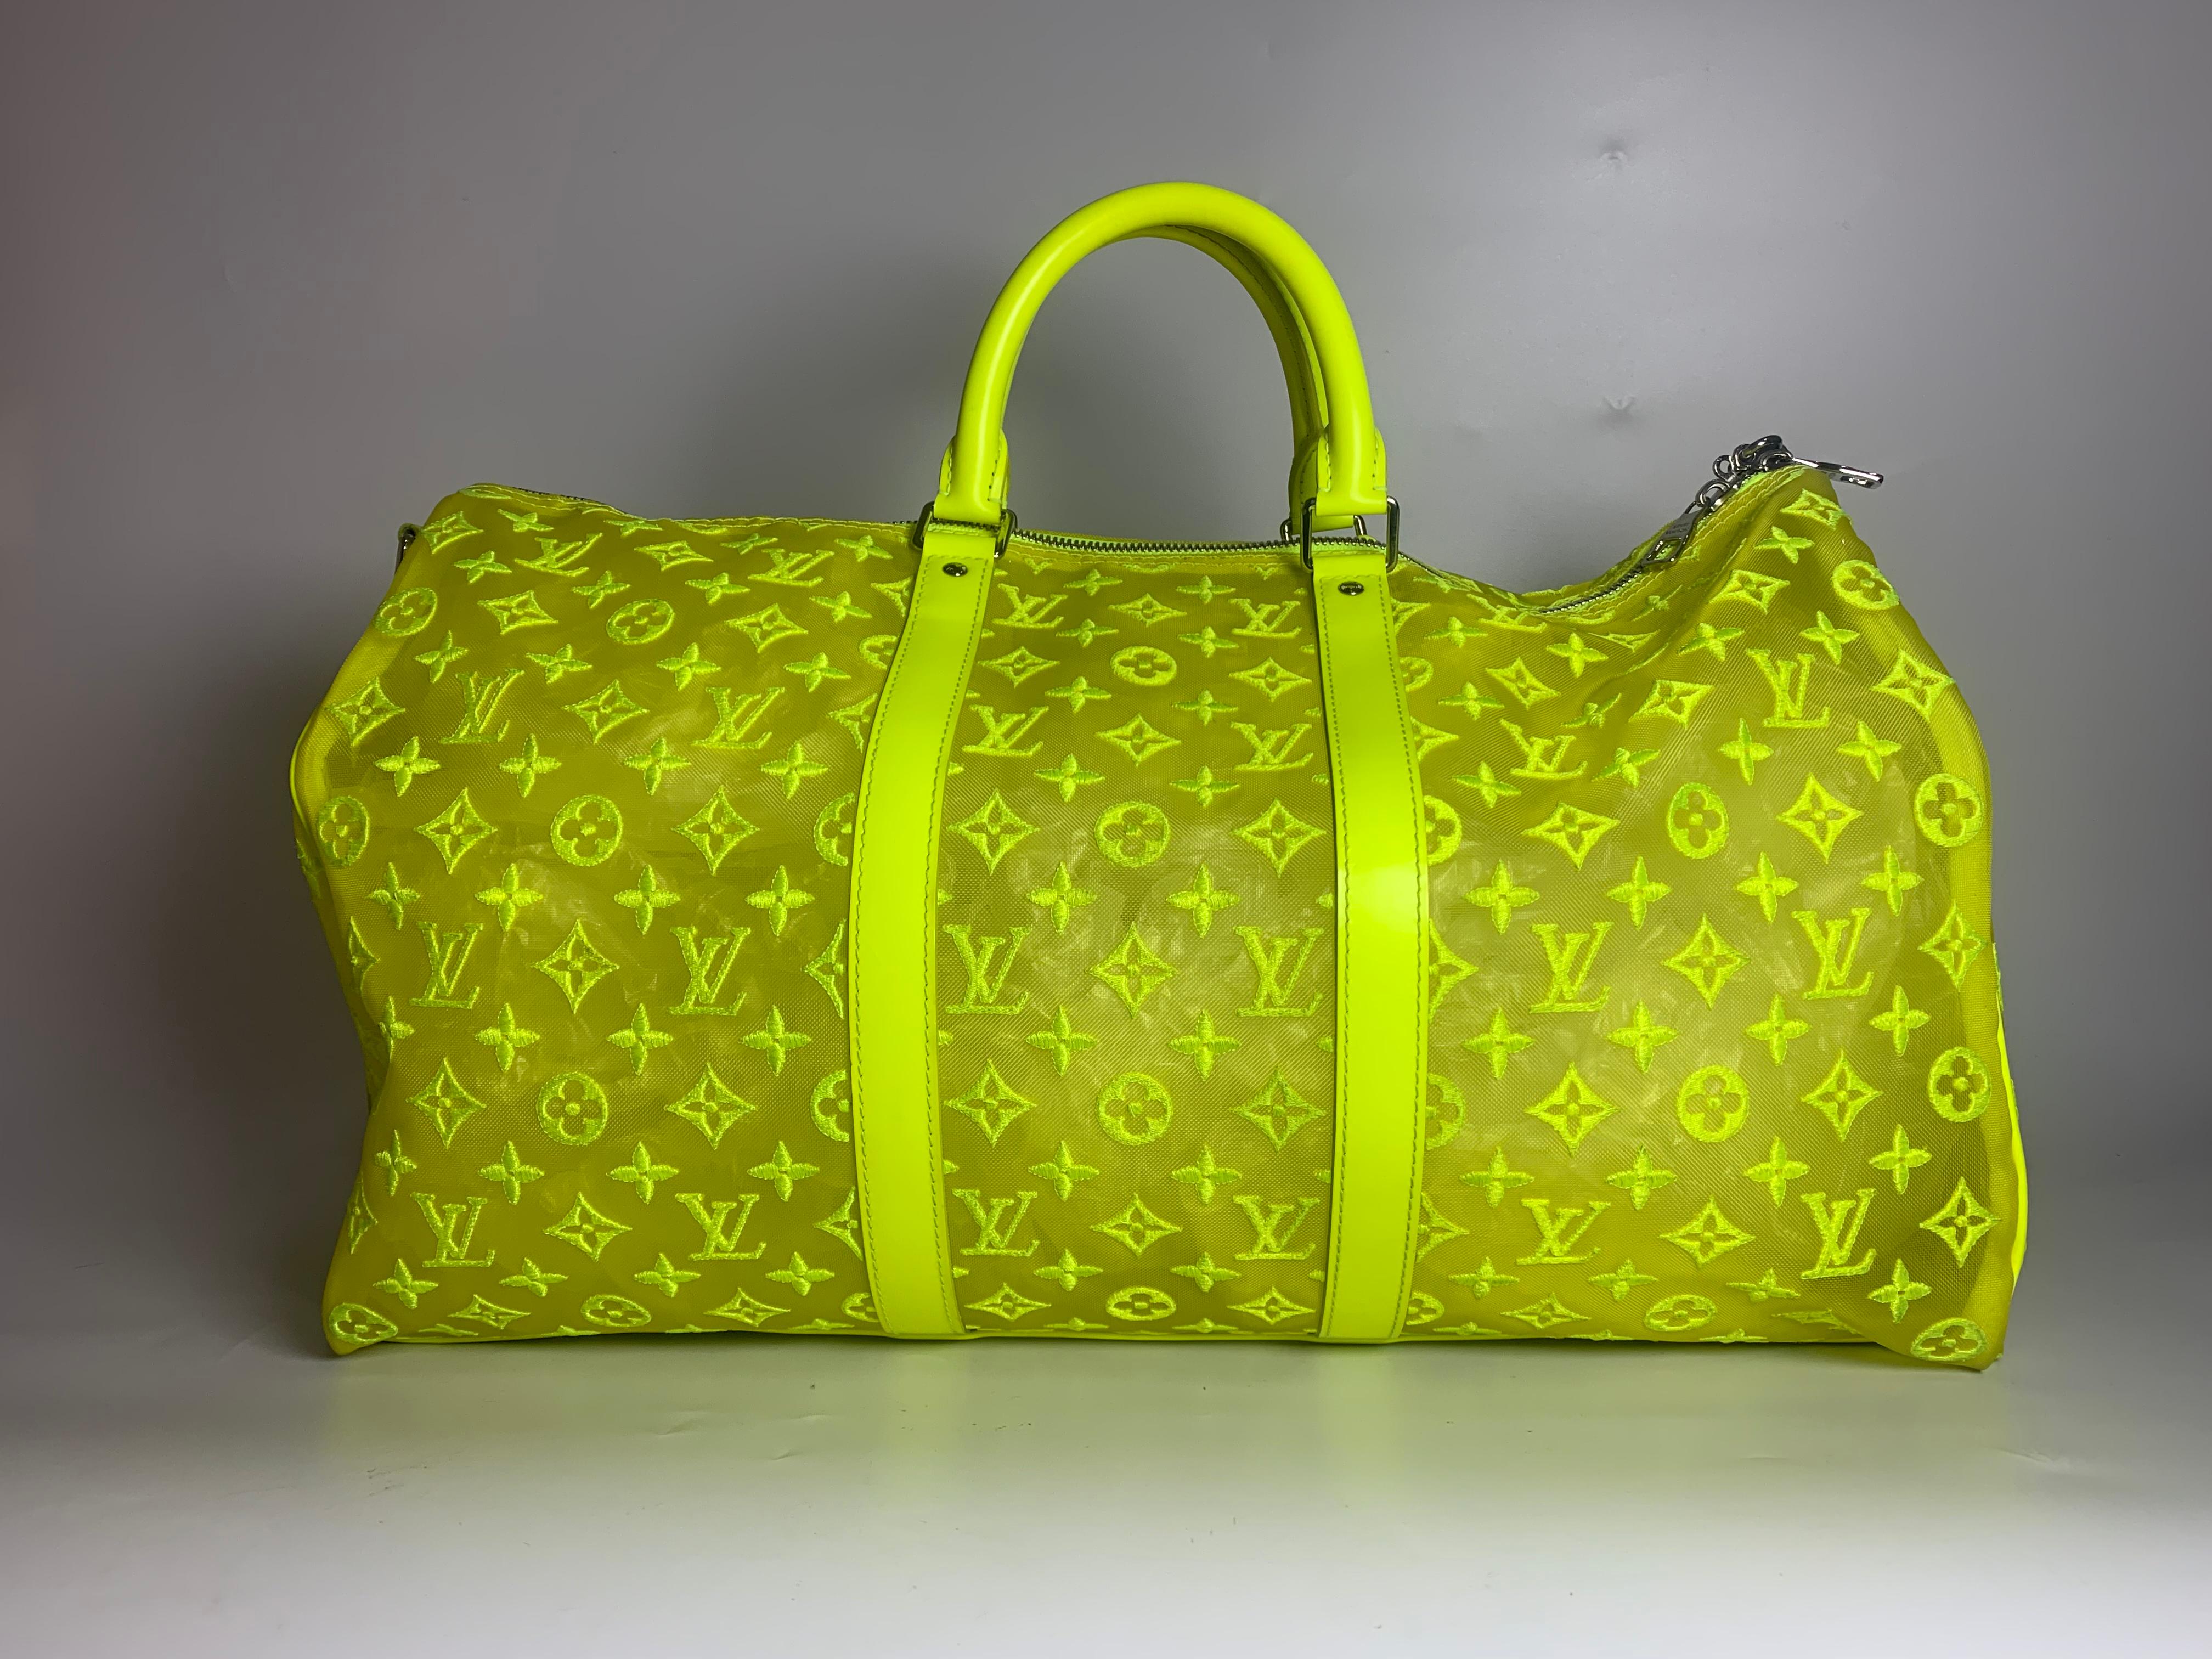 This Louis Vuitton Keepall Bandouliere Monogram Mesh 50 Neon Yellow duffle bag in Mesh / Leather with transparent mesh monogram is the coveted piece of limited collection by acclaimed artistic director of menswear Virgil Abloh.

This eye-catching